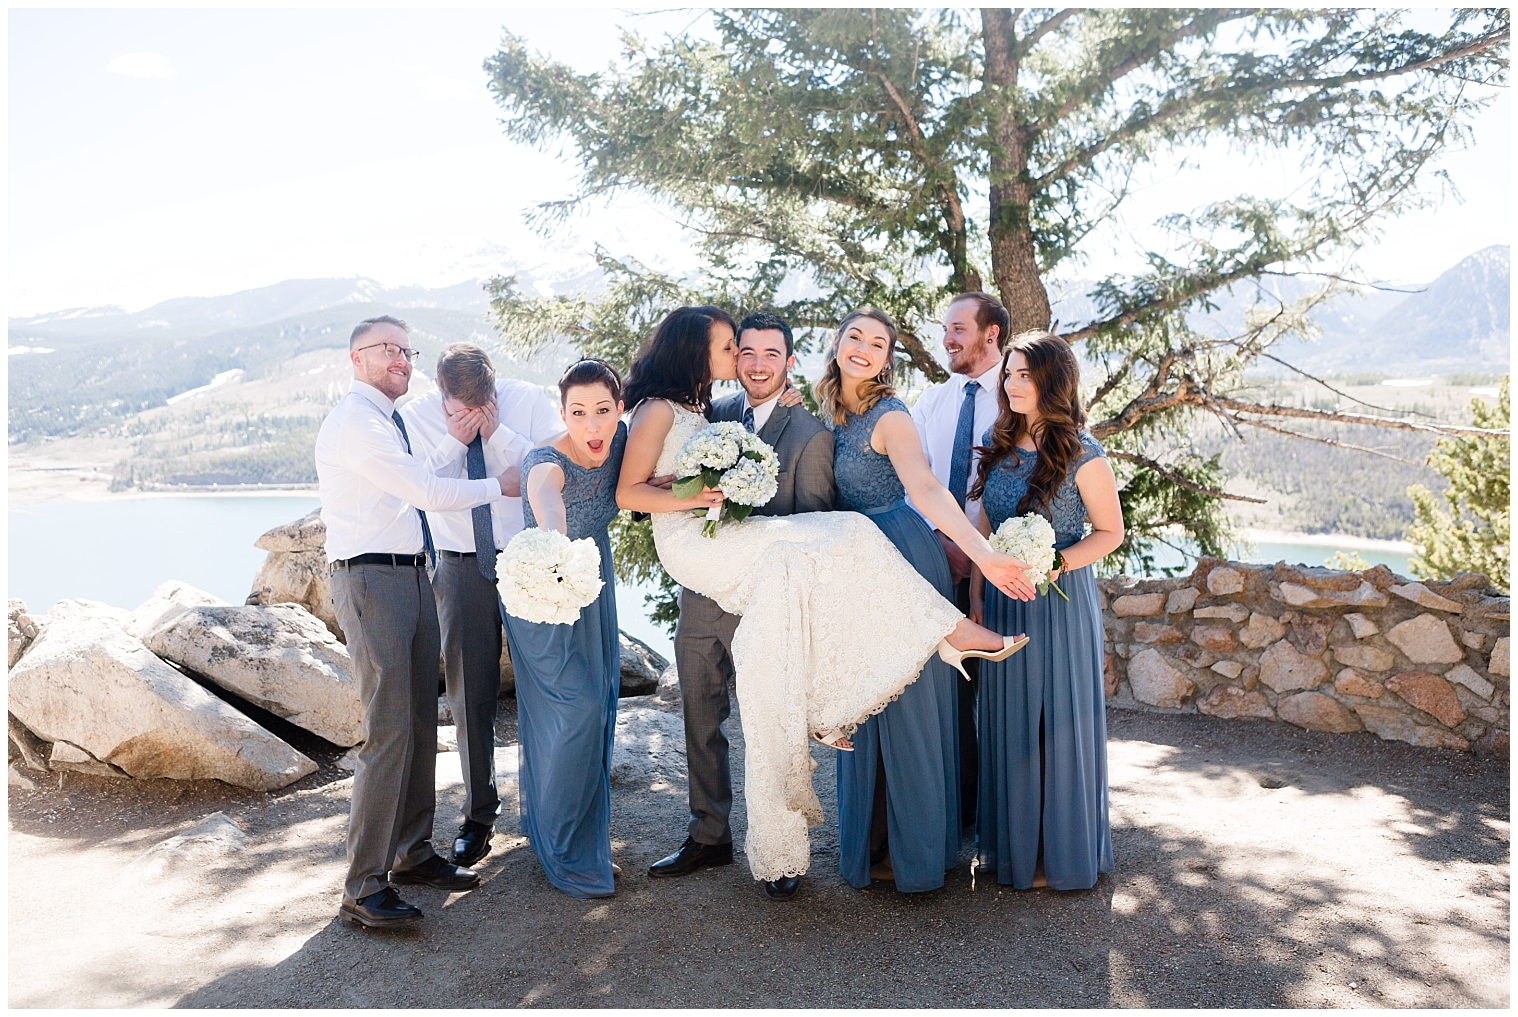 Bridal party poses for a silly photo with a Colorado elopement photographer.